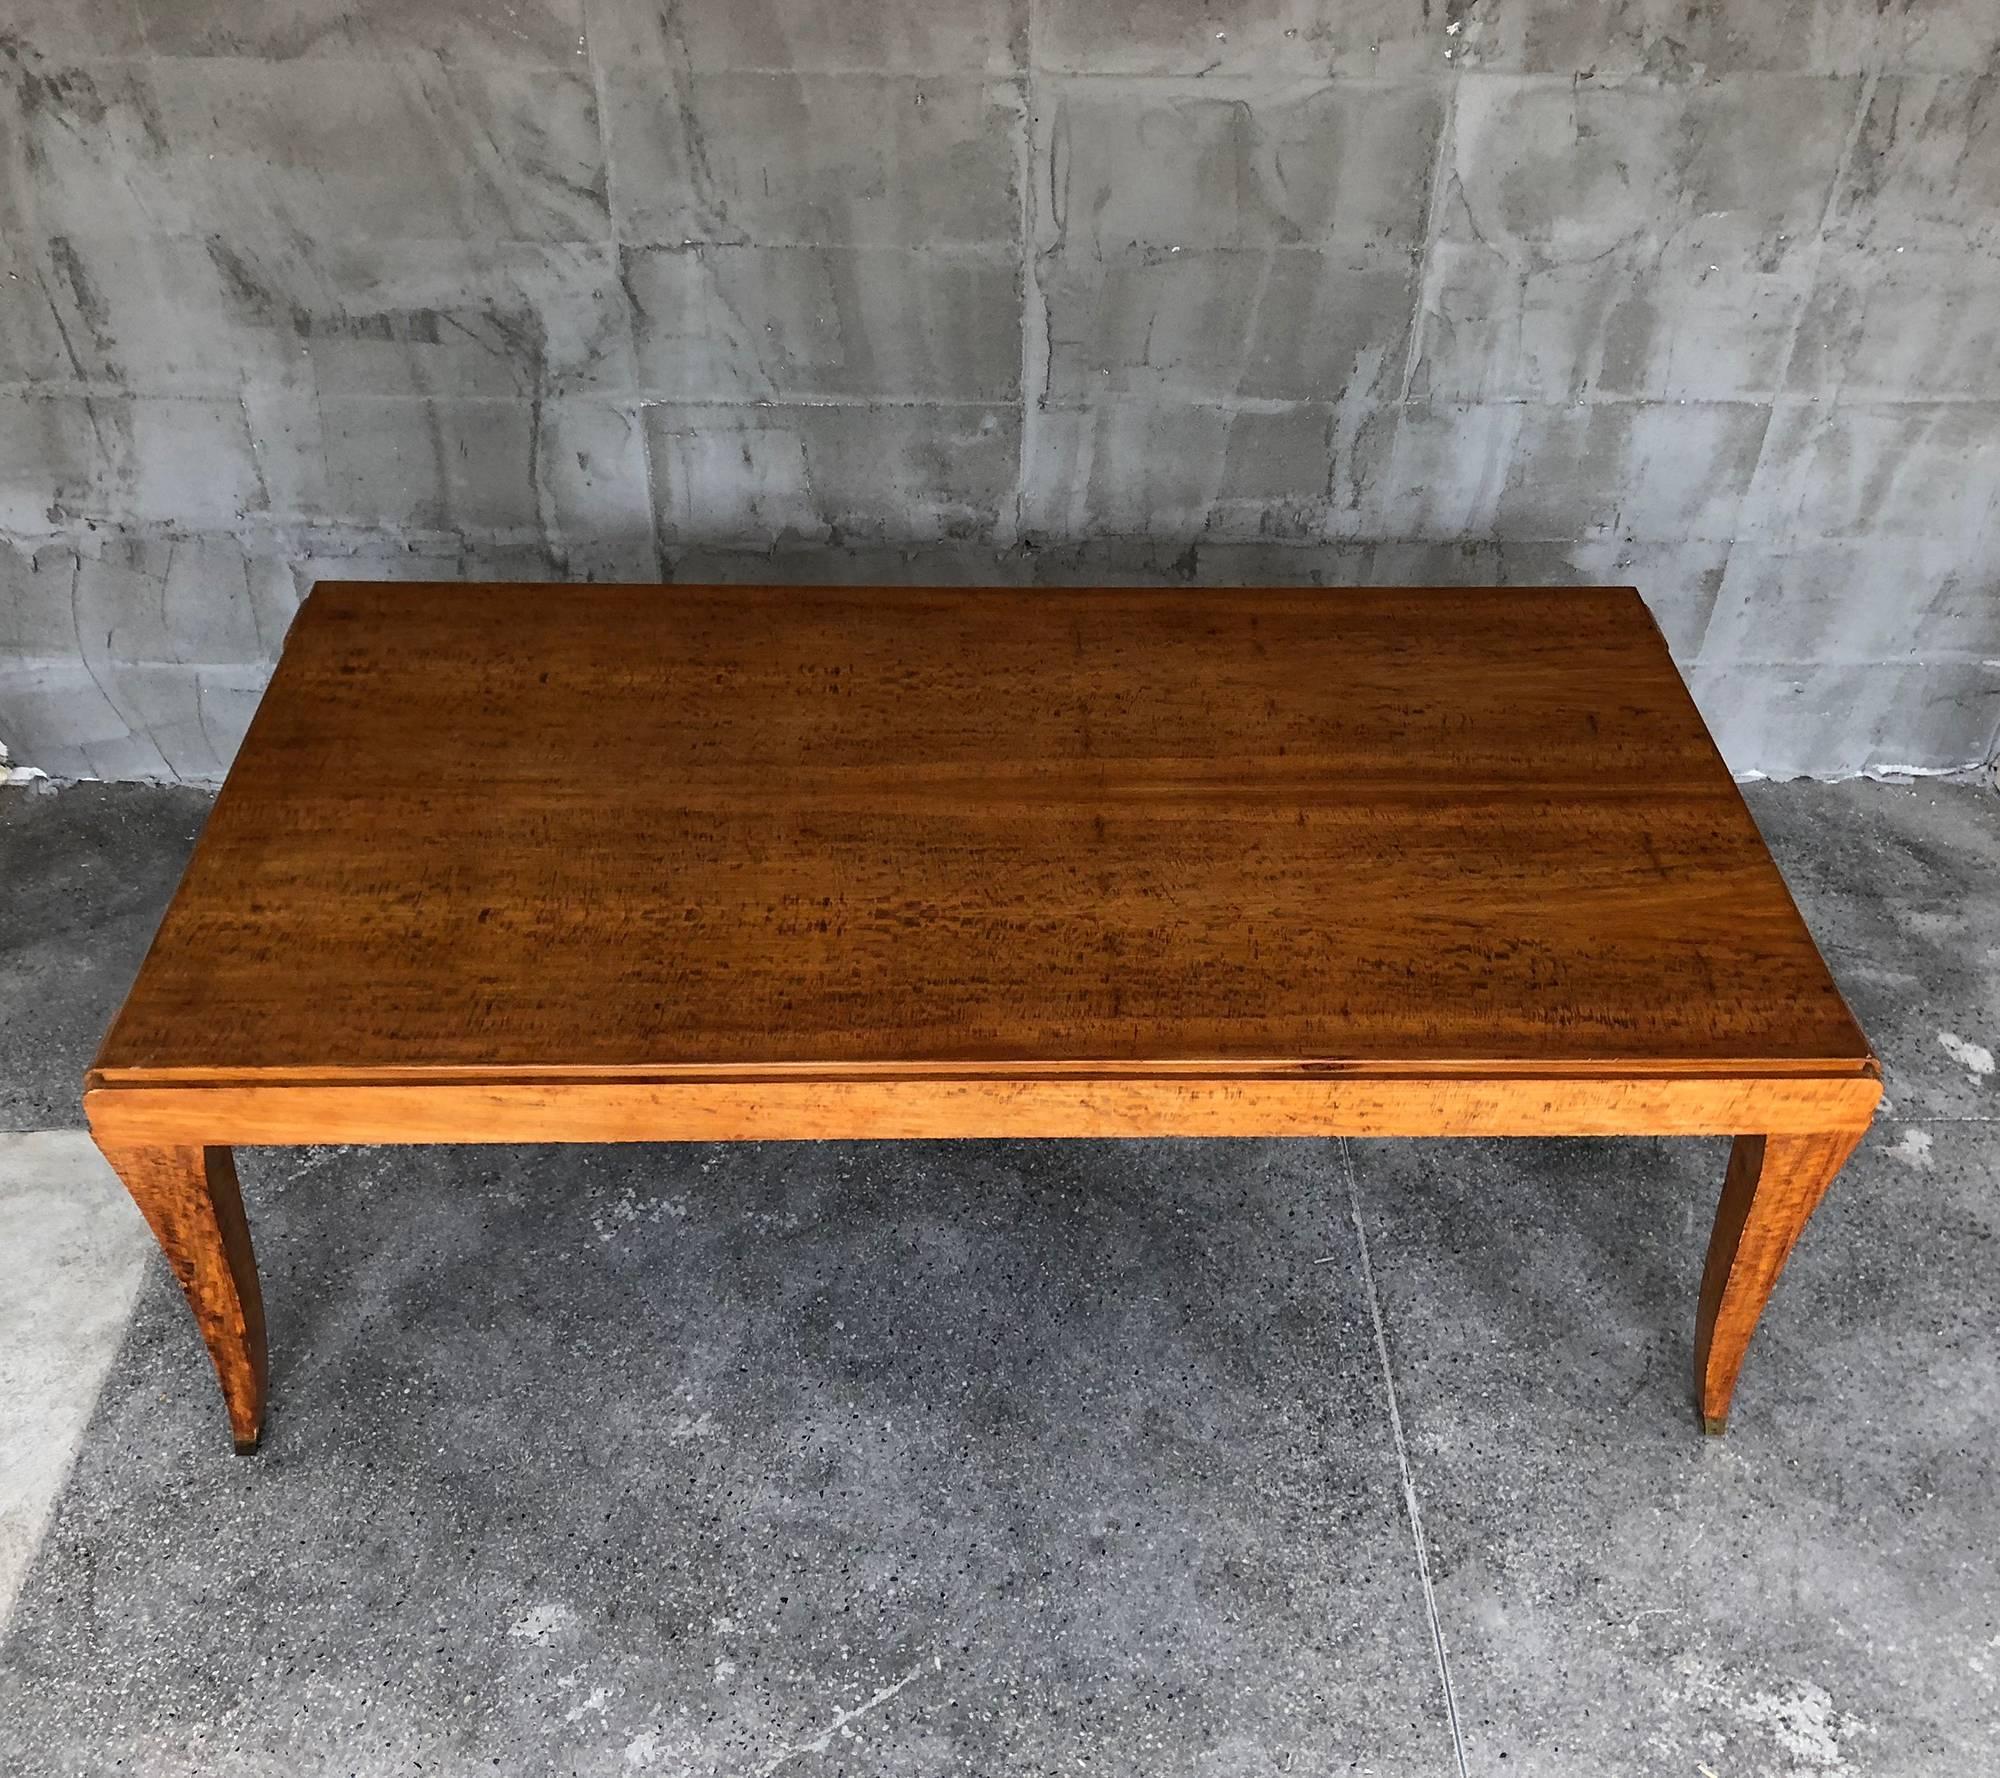 Very rare as a design high quality French dining table, eucalyptus veneer. The tables has really designed lines and proportions. There are two drawers from the two sides. Metal finishing on the legs.